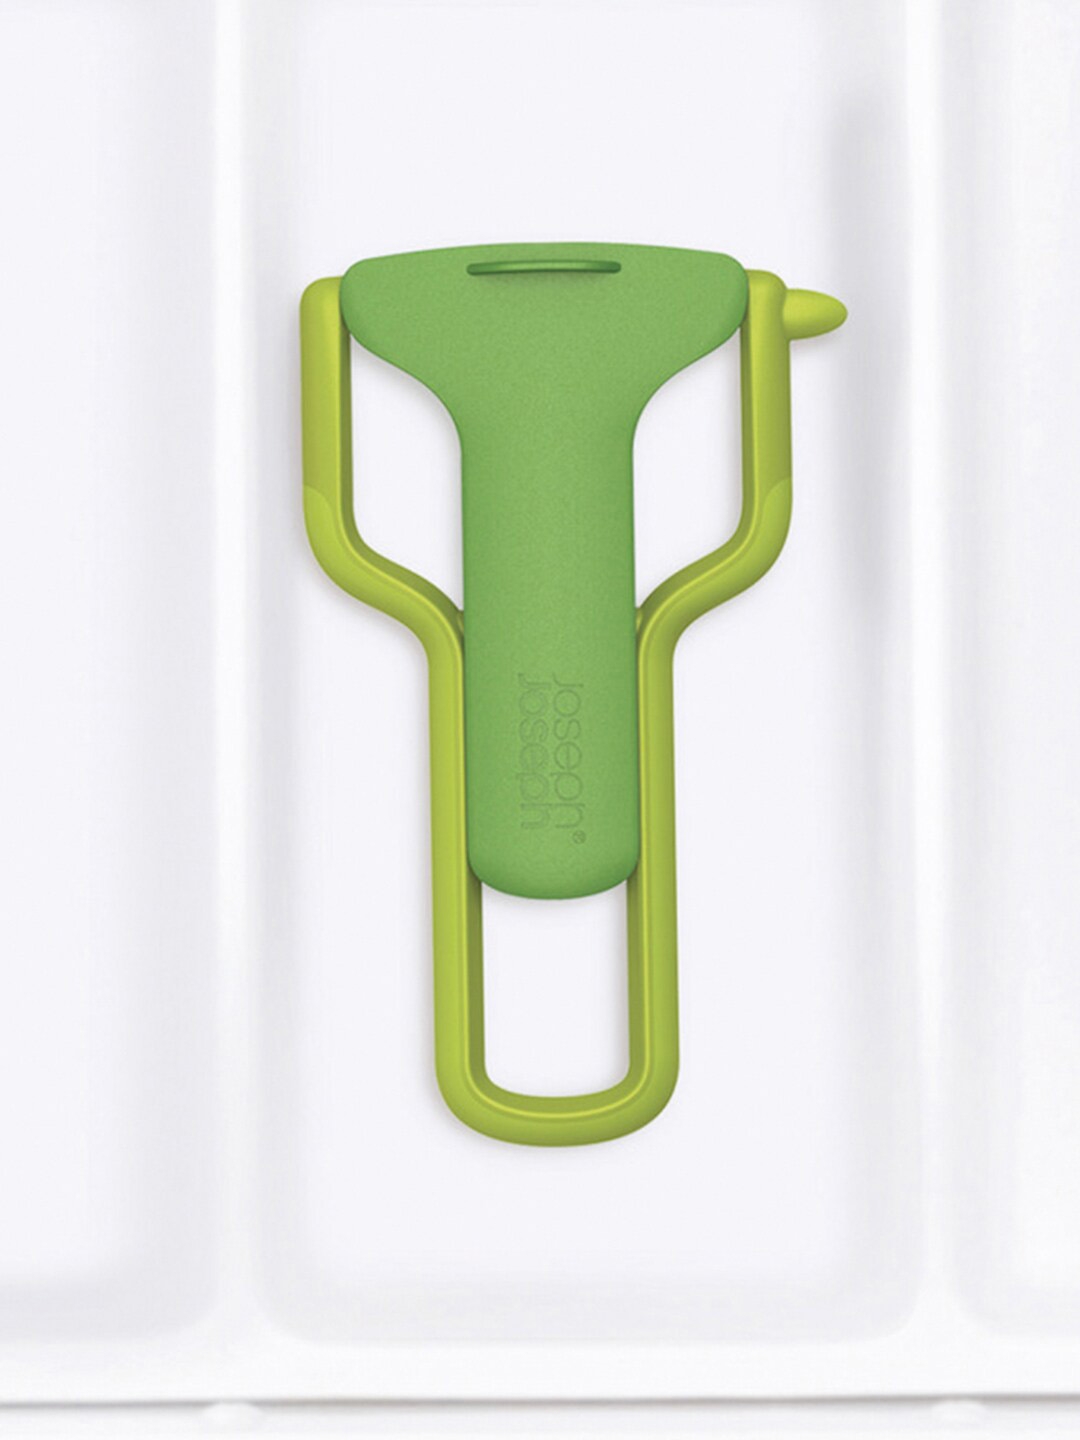 Joseph Joseph Green Stainless Steel Y Shaped Peeler with Blade Guard